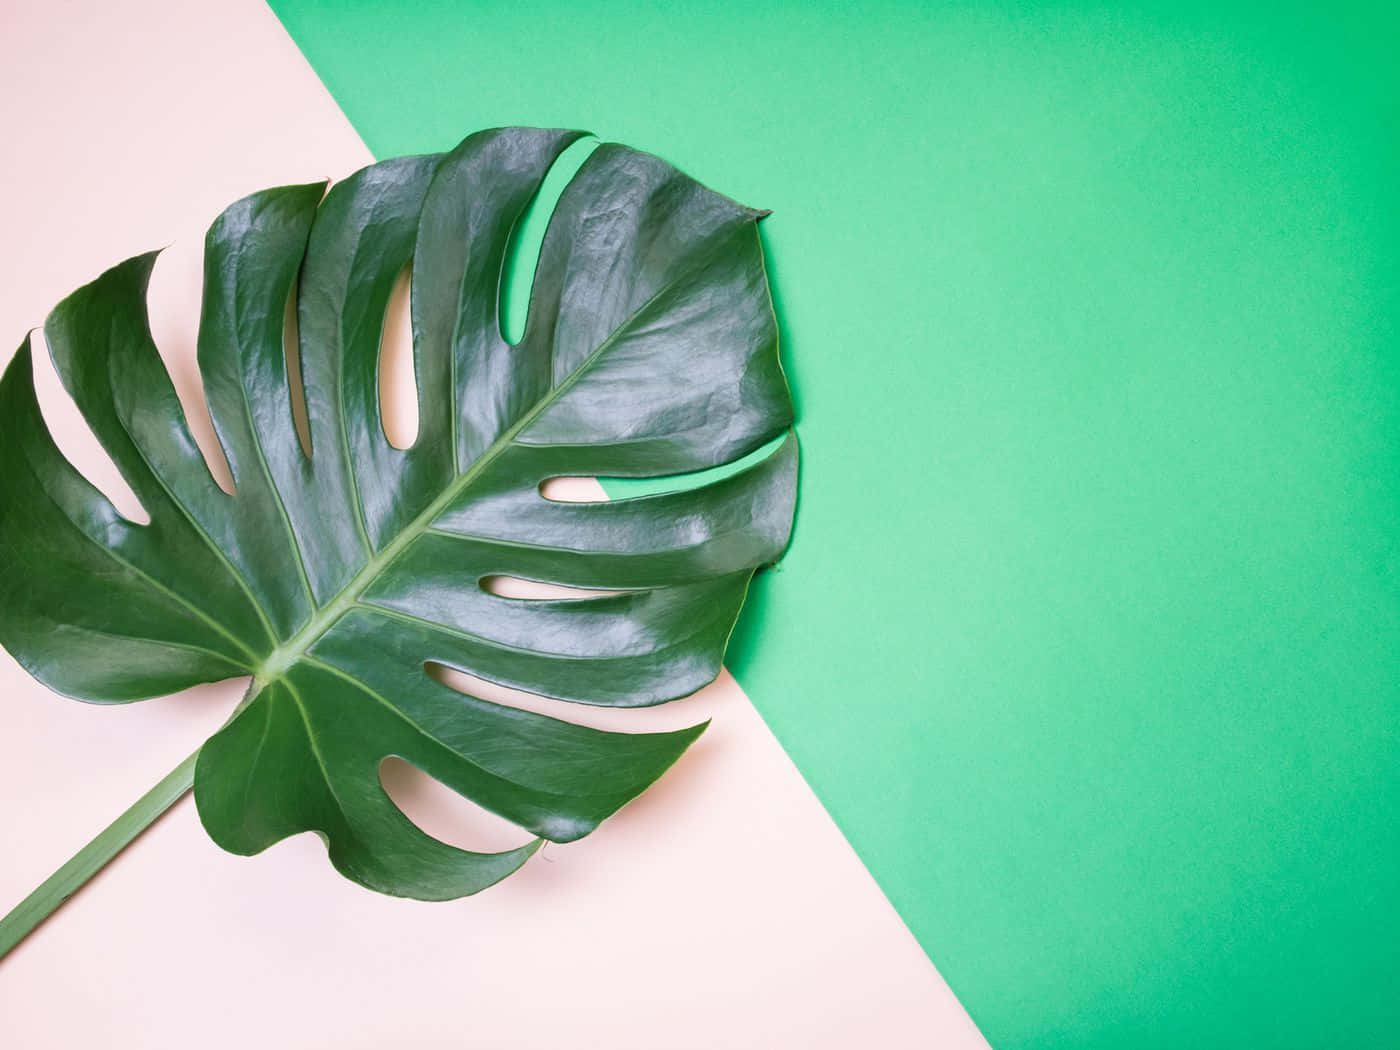 A Monstera Leaf On A Pink And Green Background